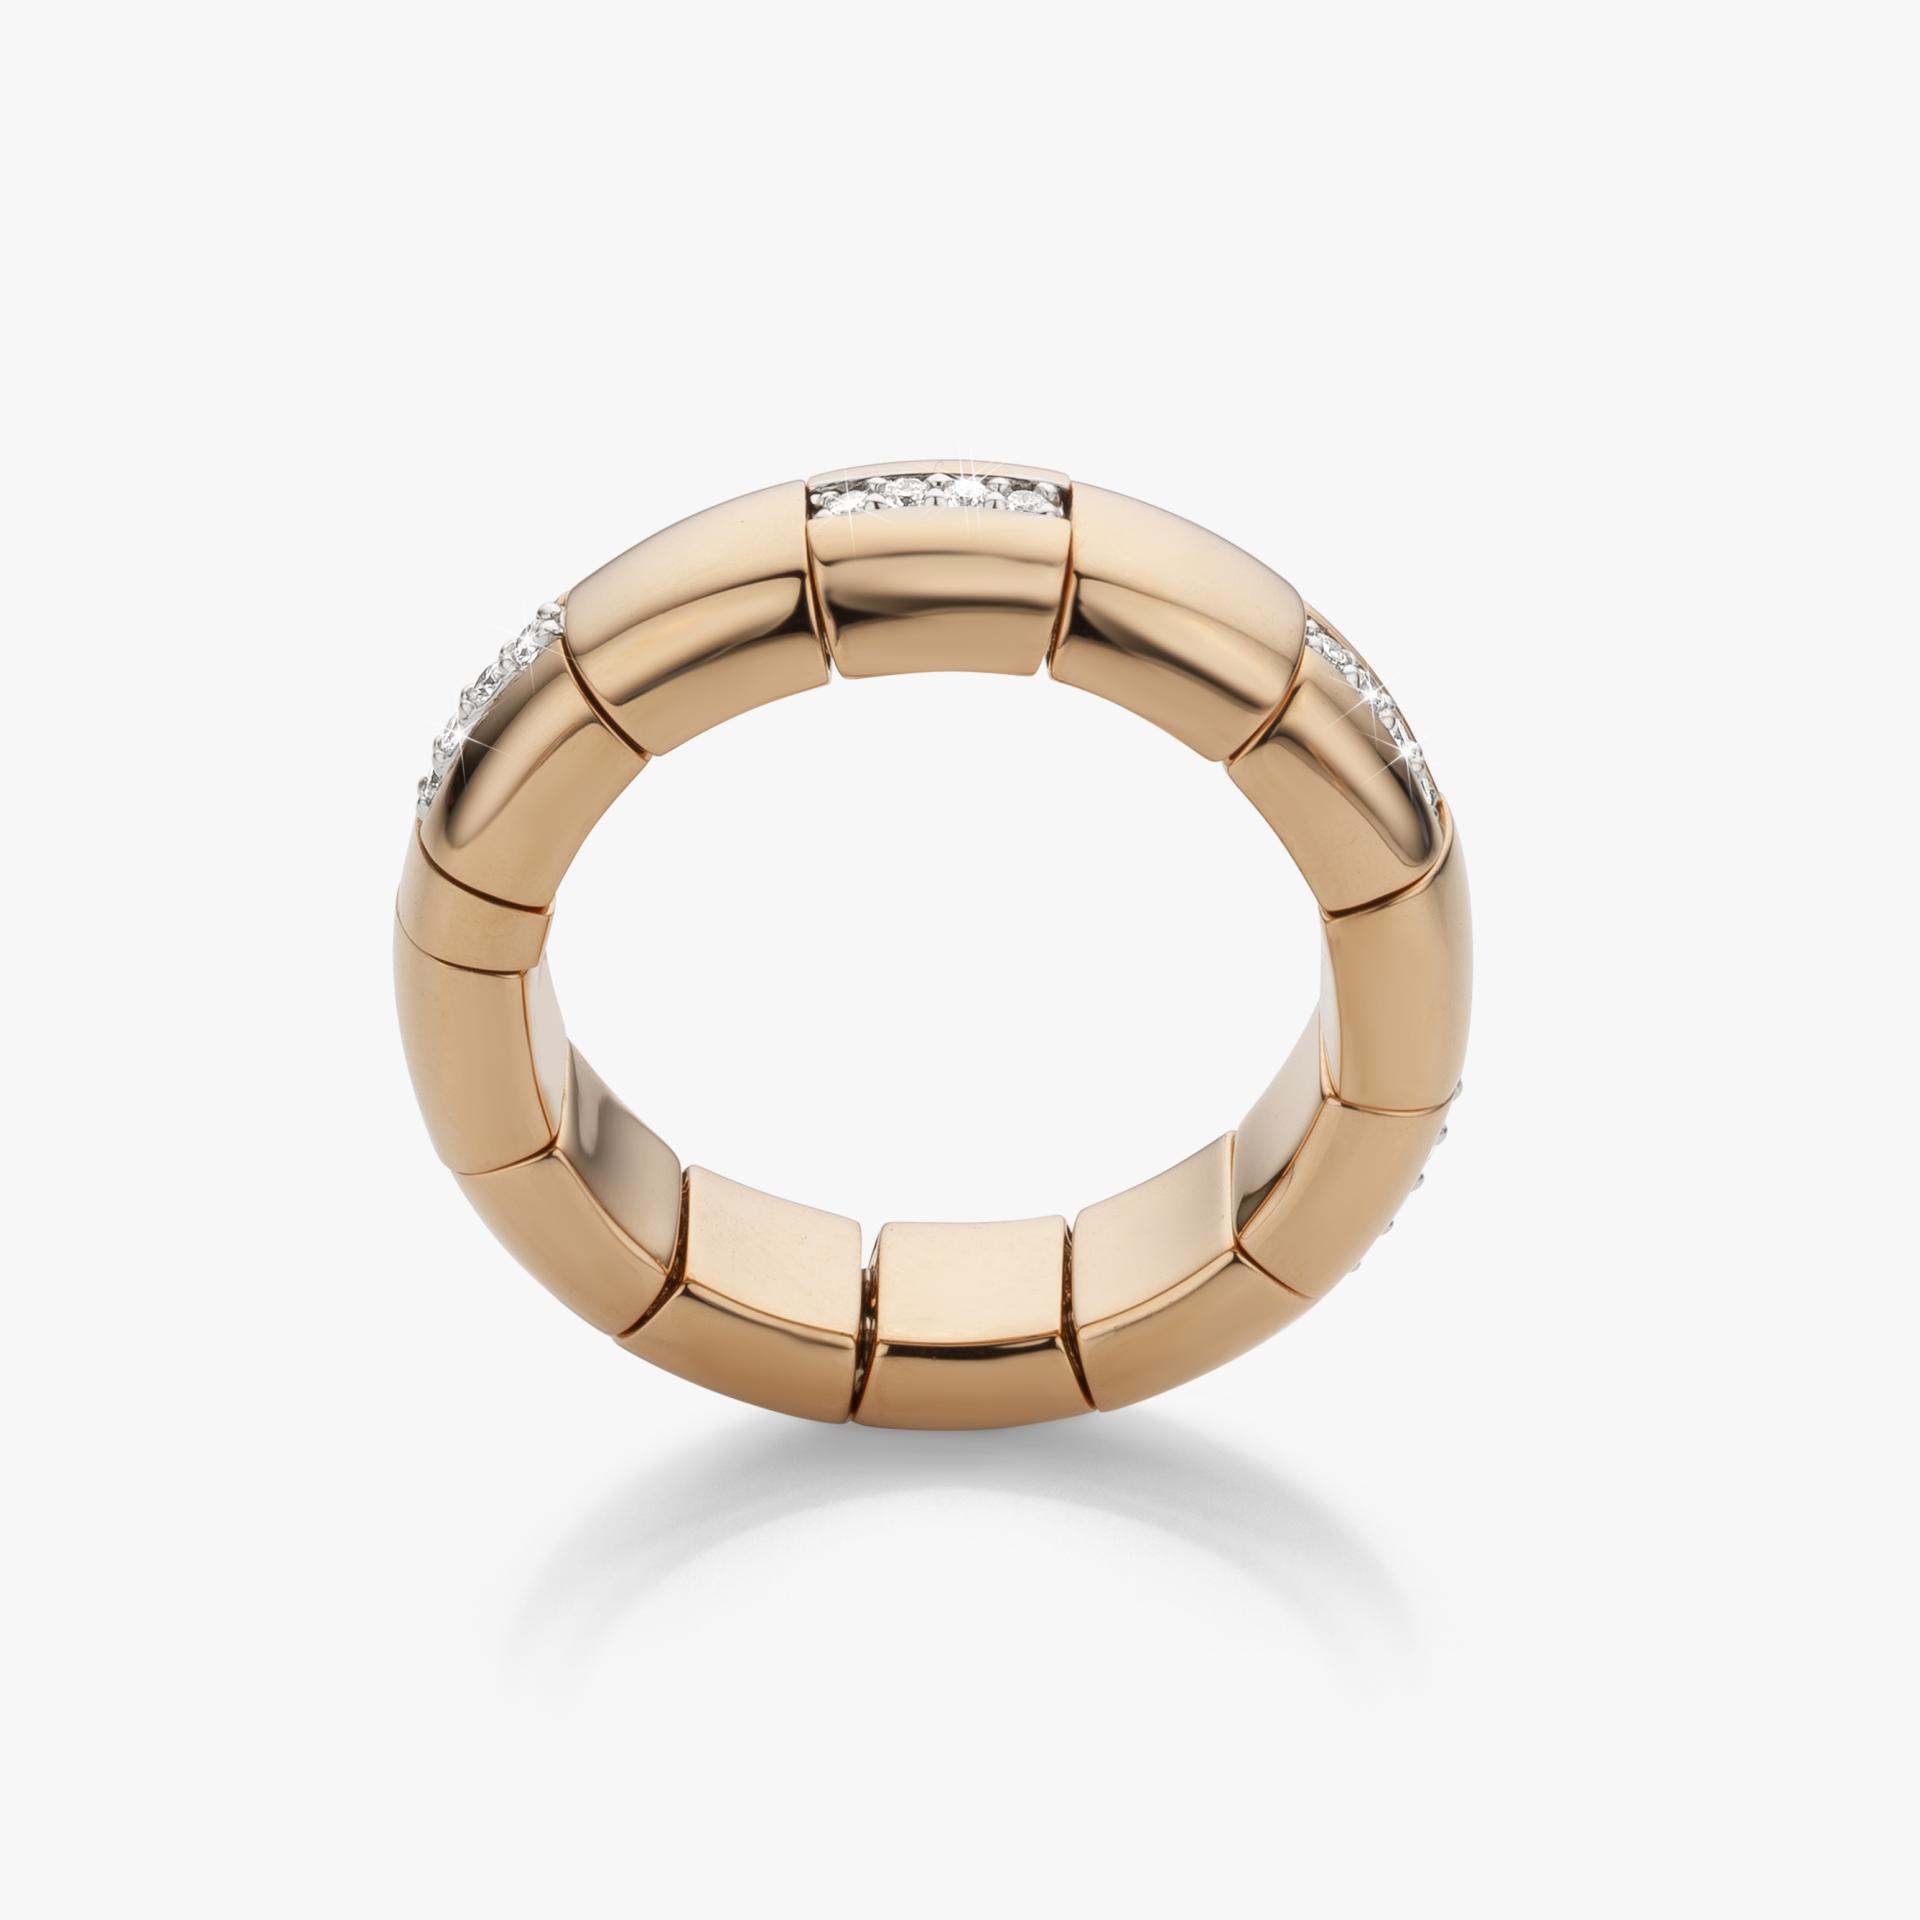 Rose gold ring Pura Oro set with brilliants. made by Demeglio